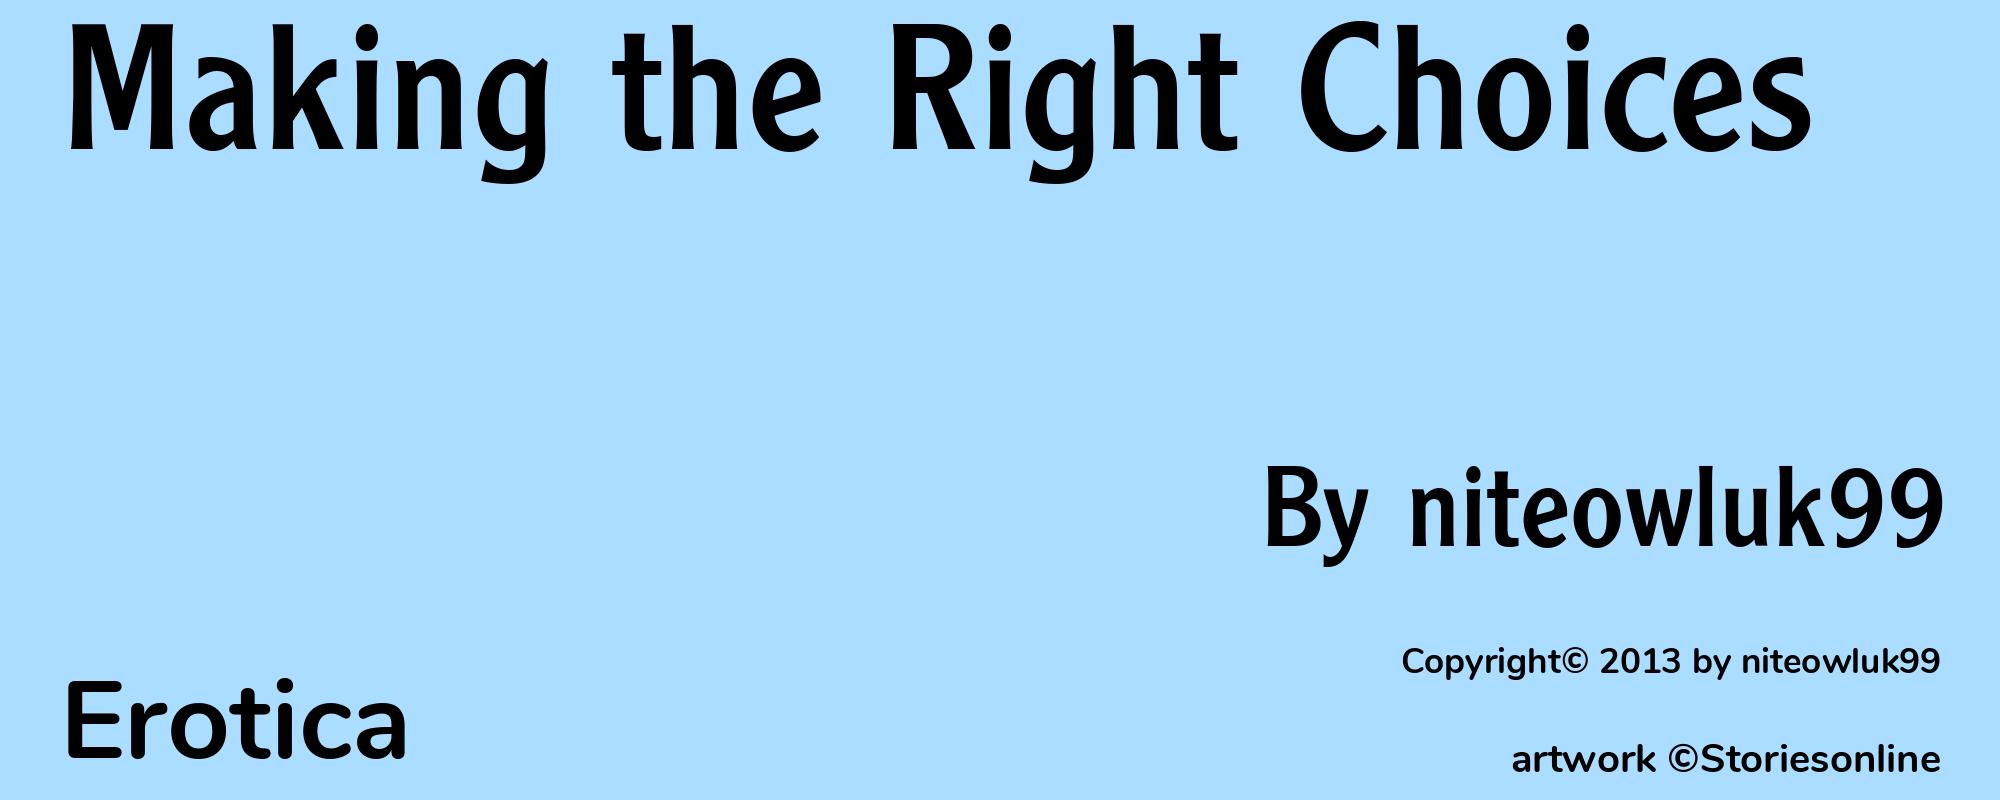 Making the Right Choices - Cover